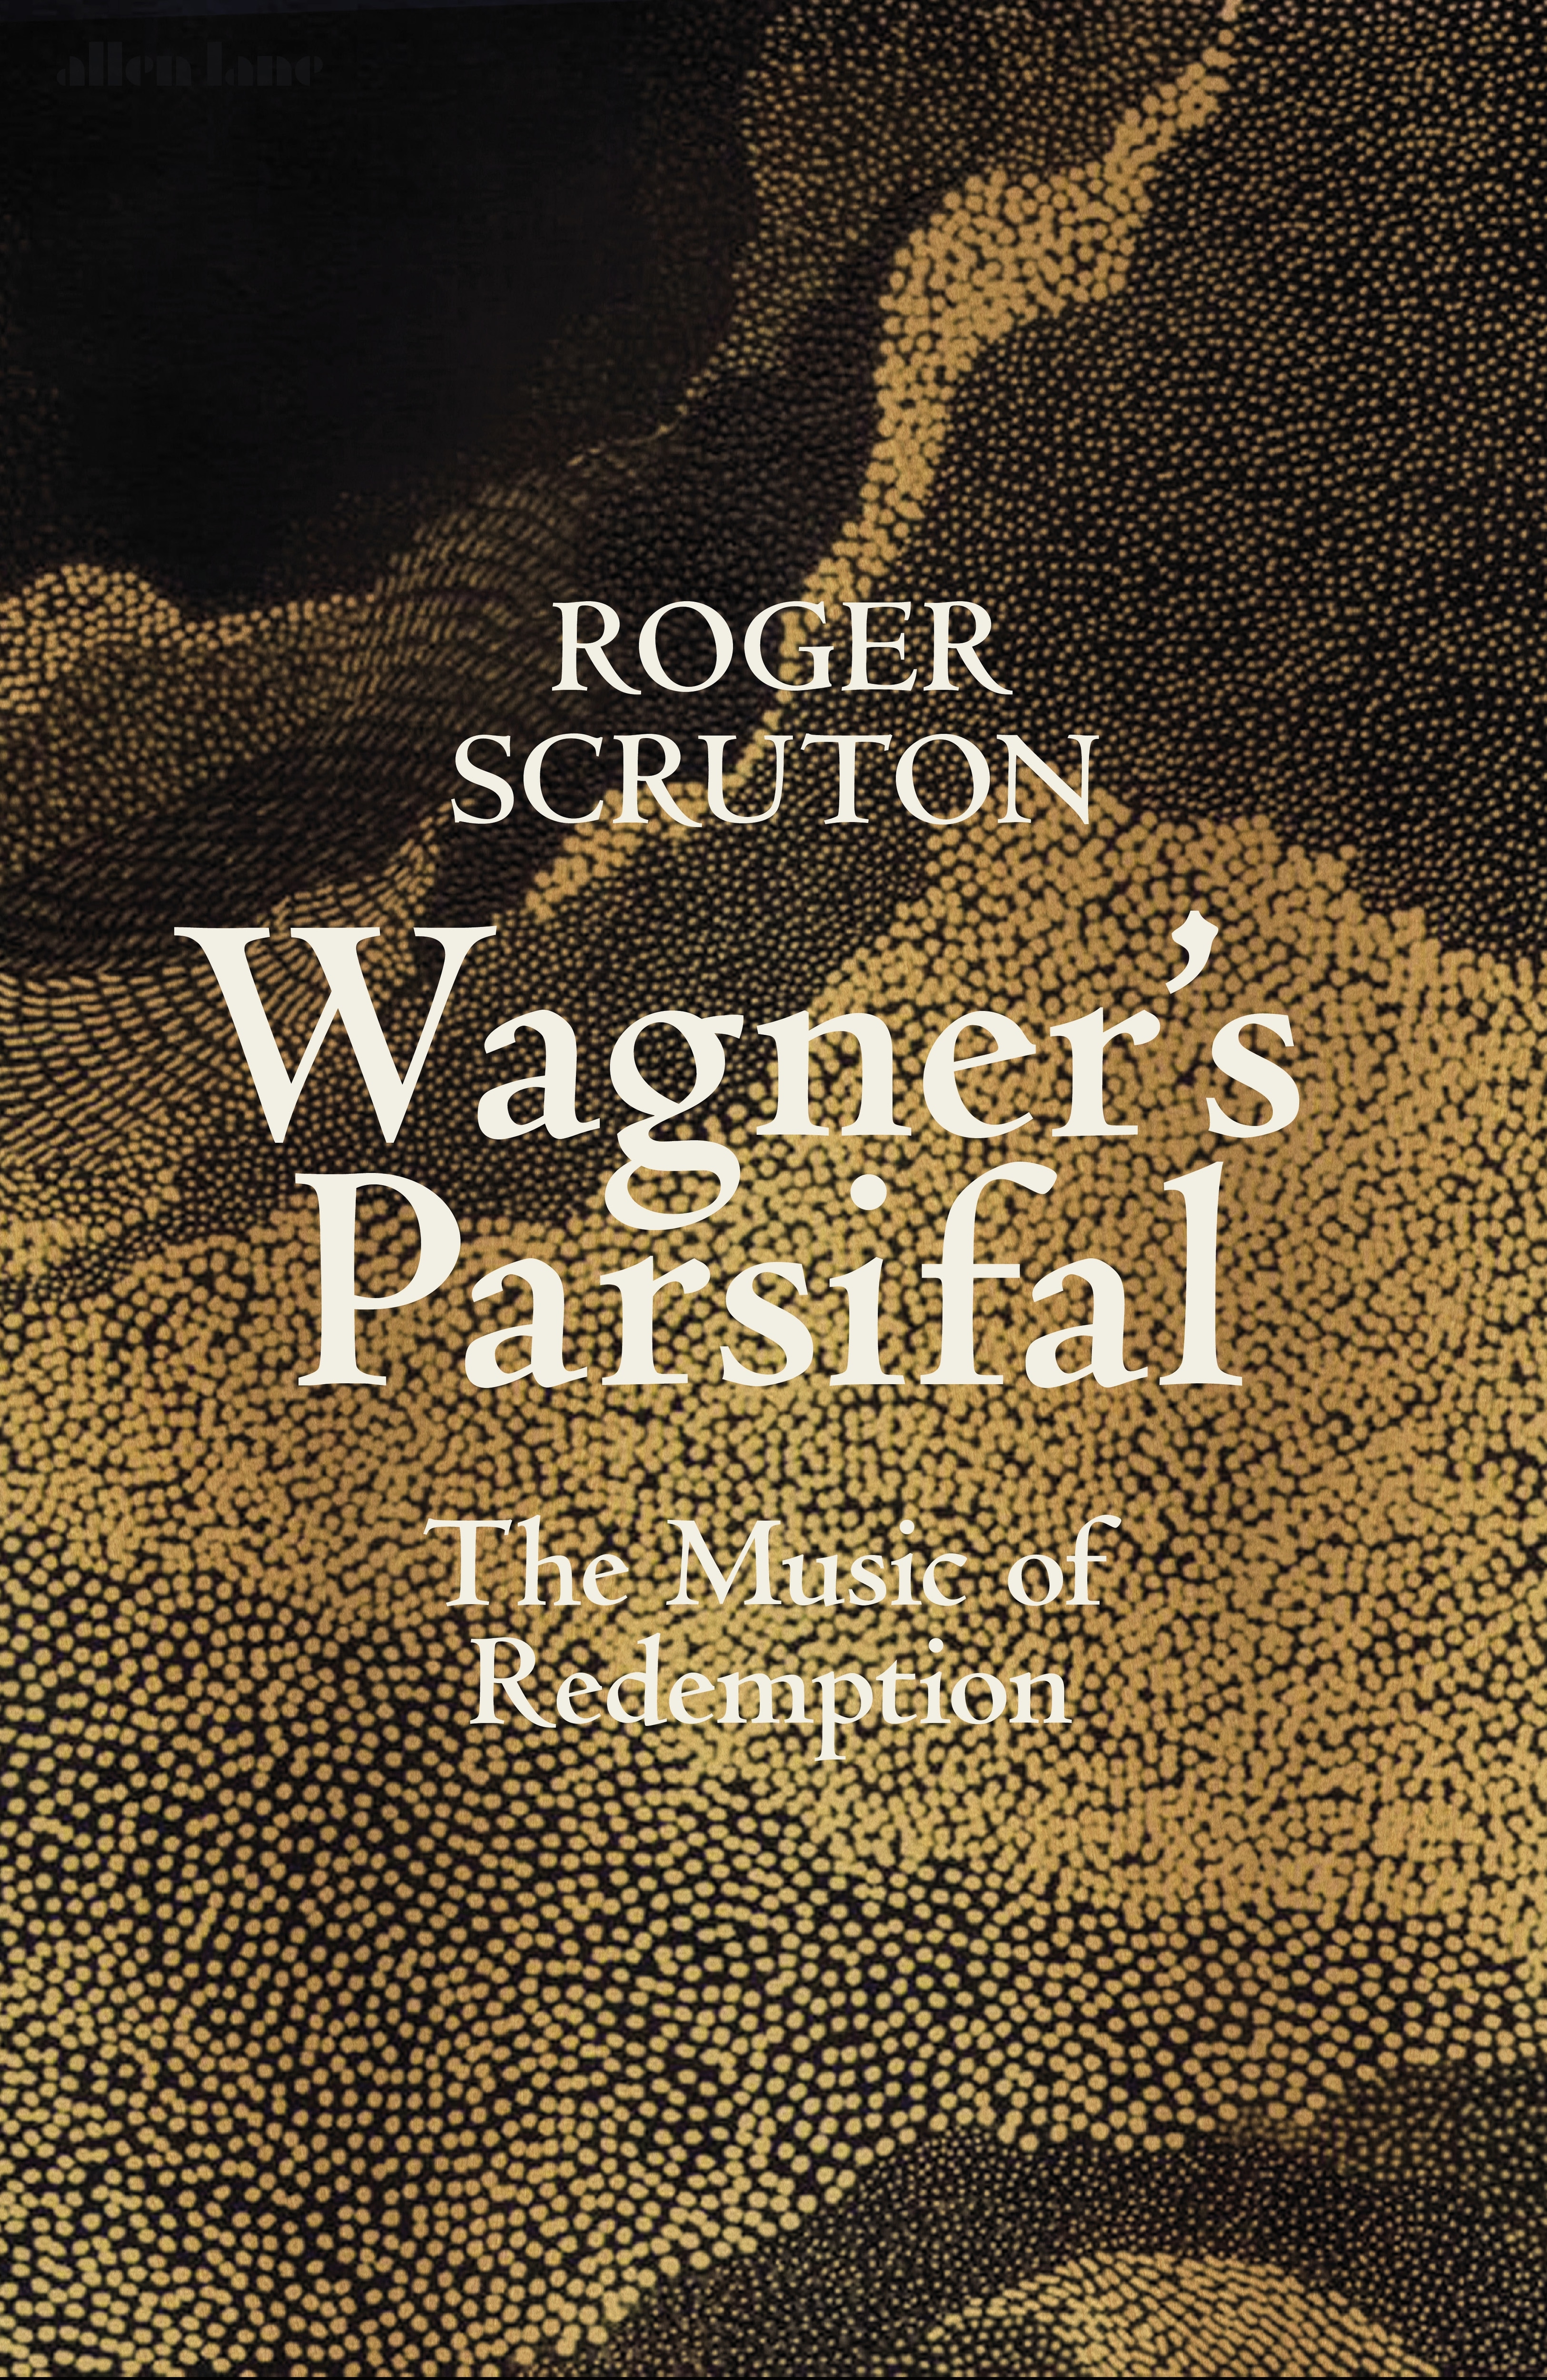 Book “Wagner's Parsifal” by Roger Scruton — May 7, 2020